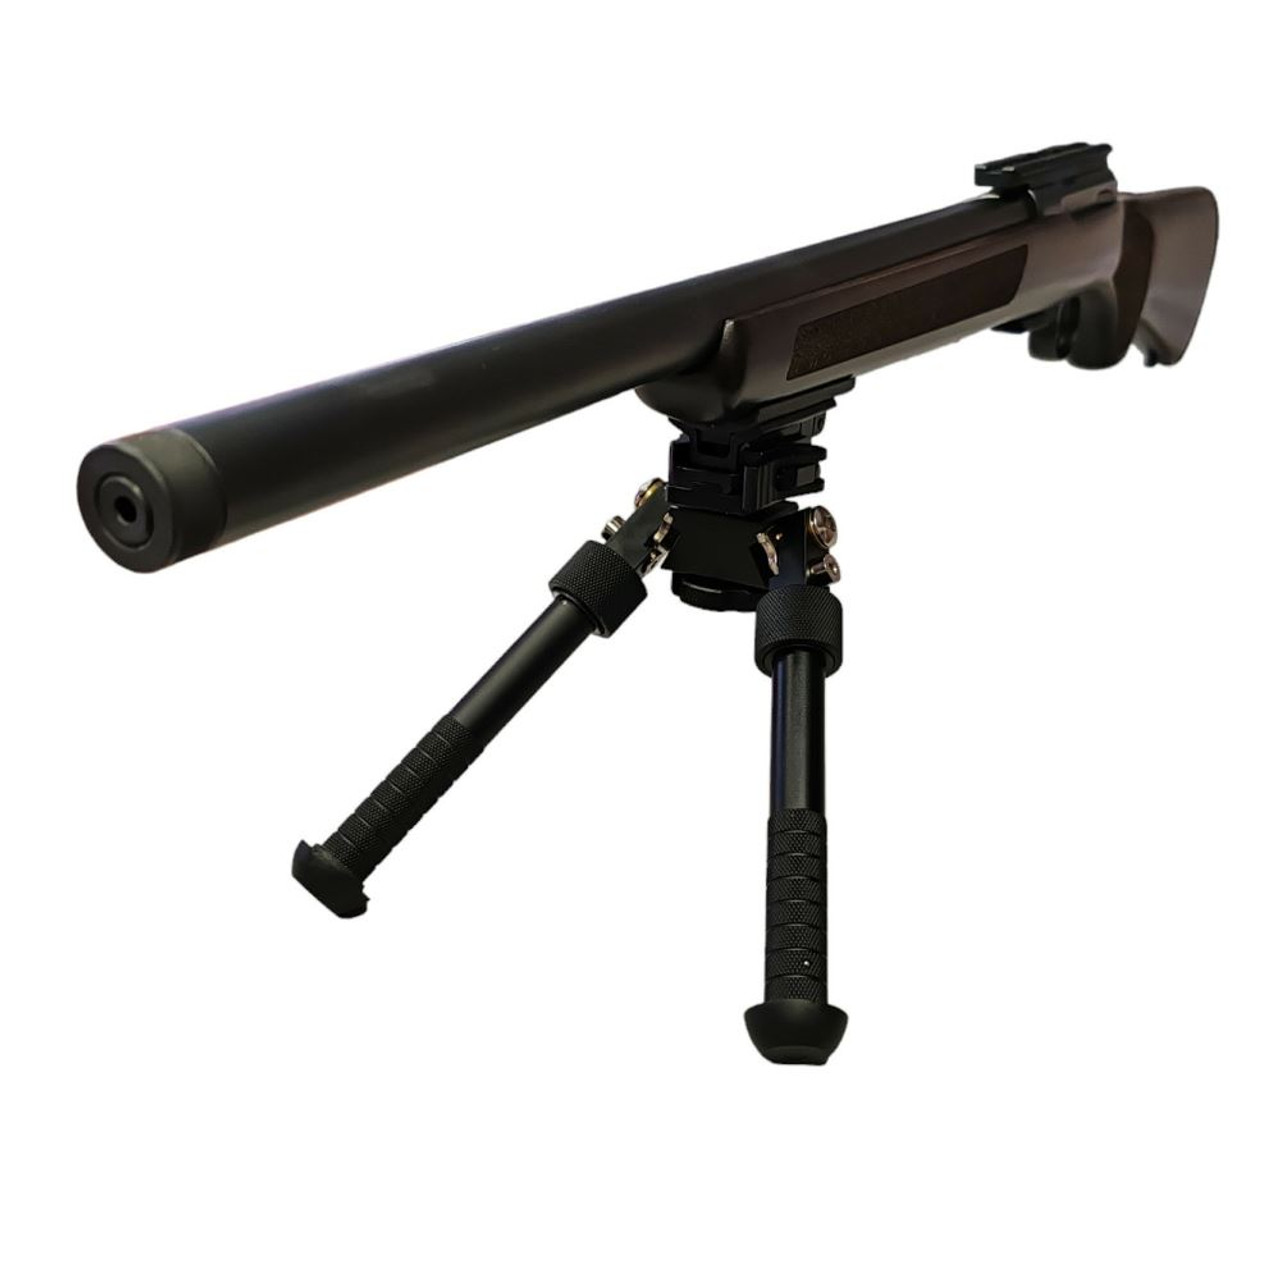 Rifle Bipod 6-9" (15-23cm) Rotating Quick Release Weaver Fitting